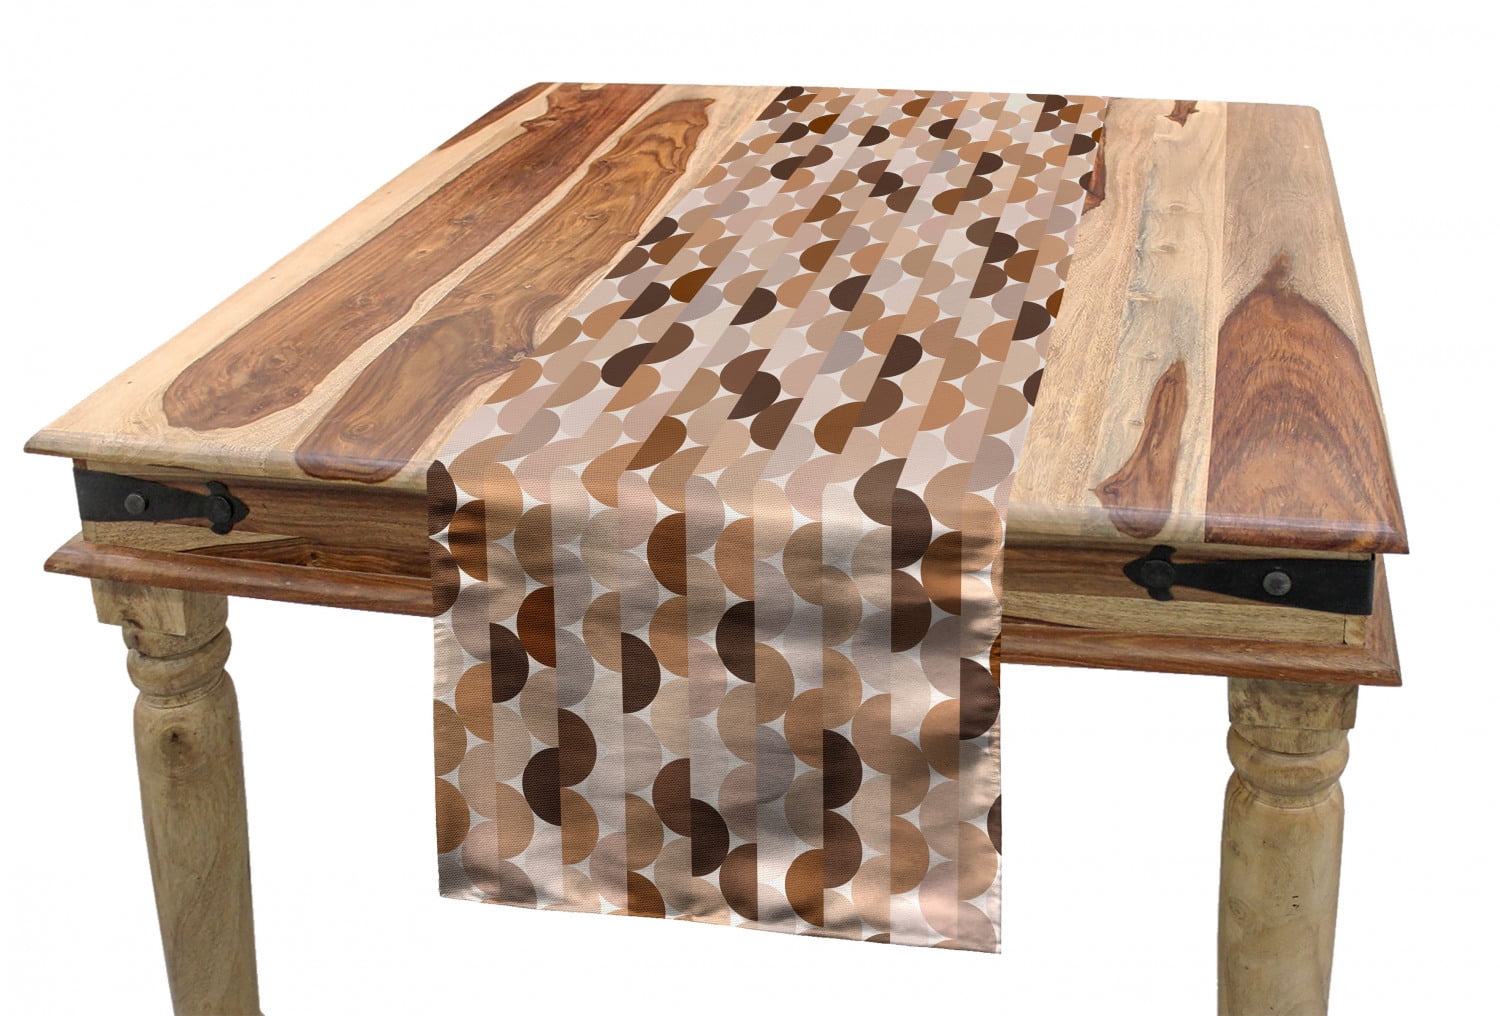 Abstract Table Runner, Semicircles or Half Round in Brown Tones, Dining